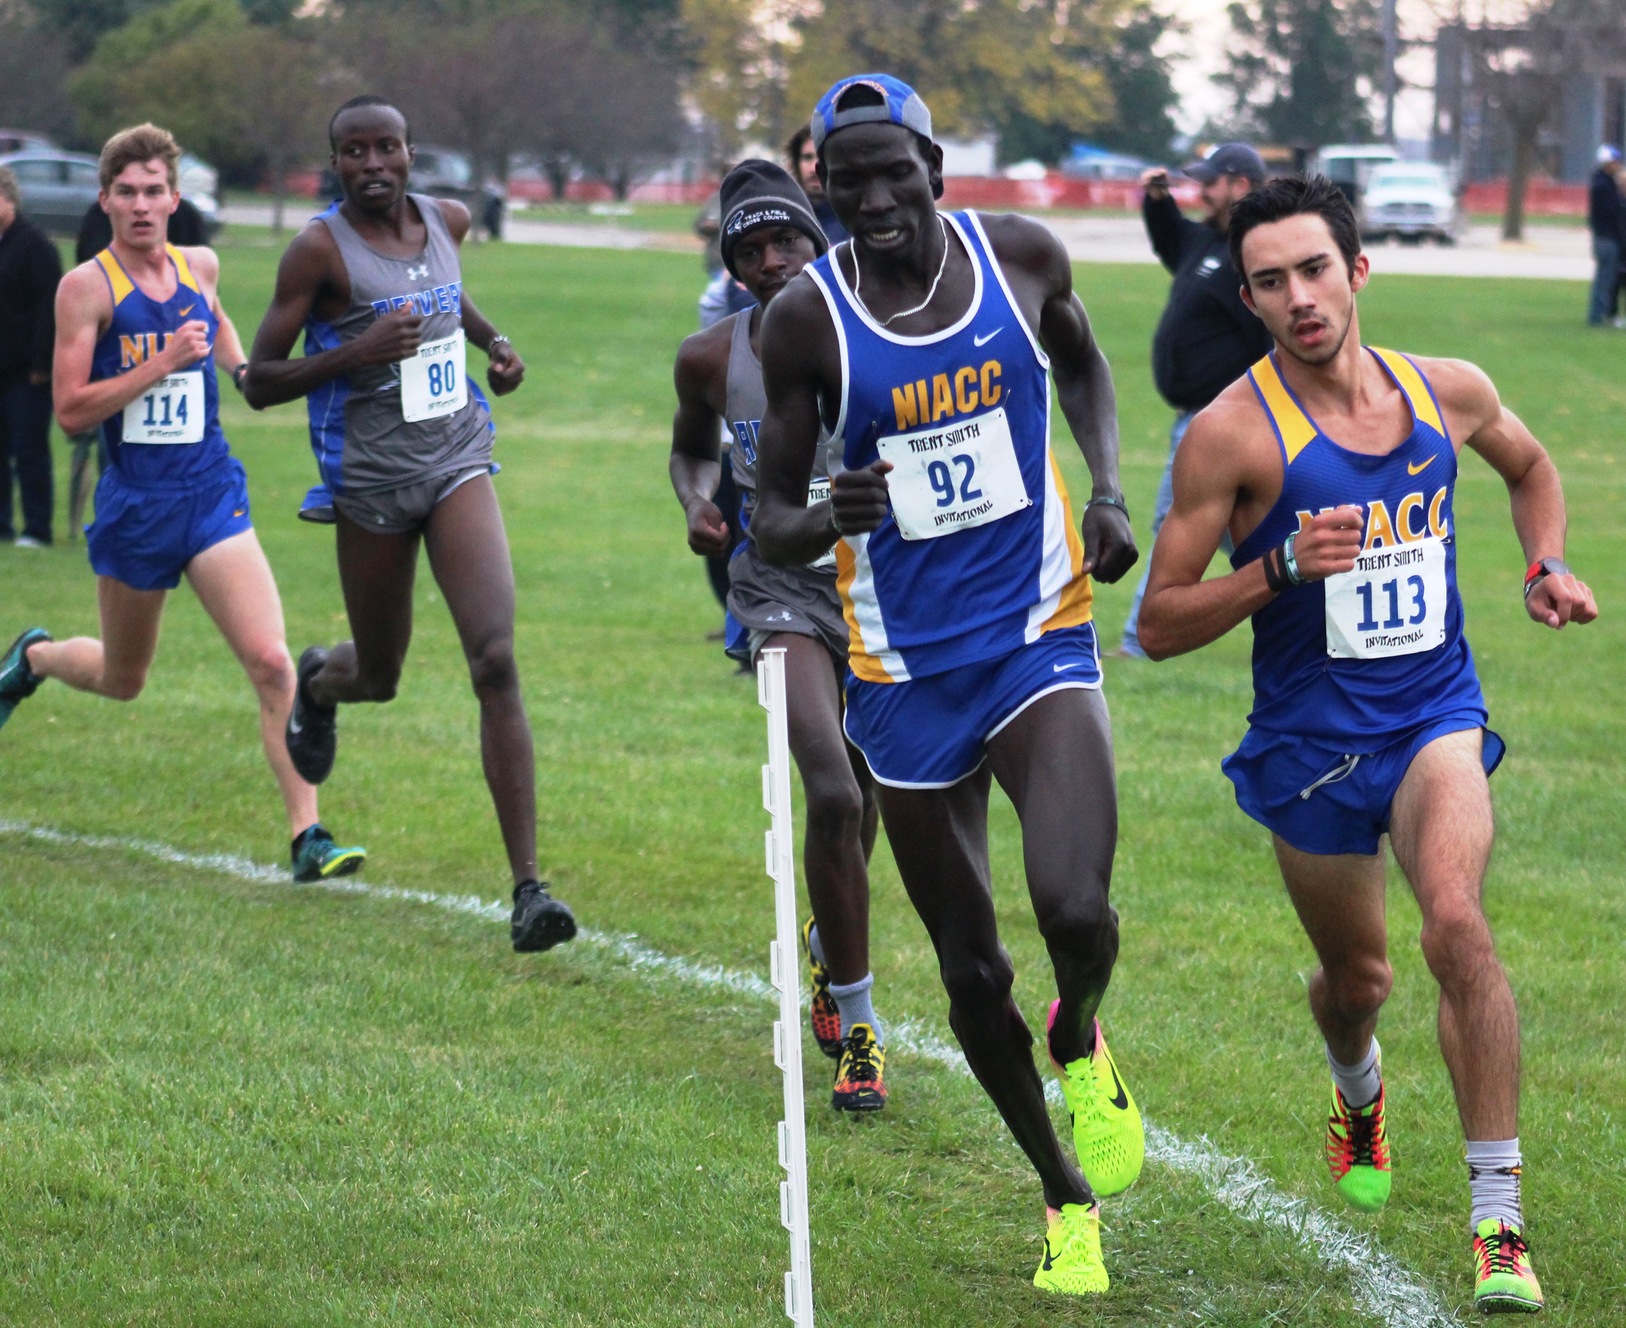 NIACC's Brian Jacques (right) and Wal Khat, who was running for the NIACC alumni team) share the lead at the Trent Smith Invite on Friday.